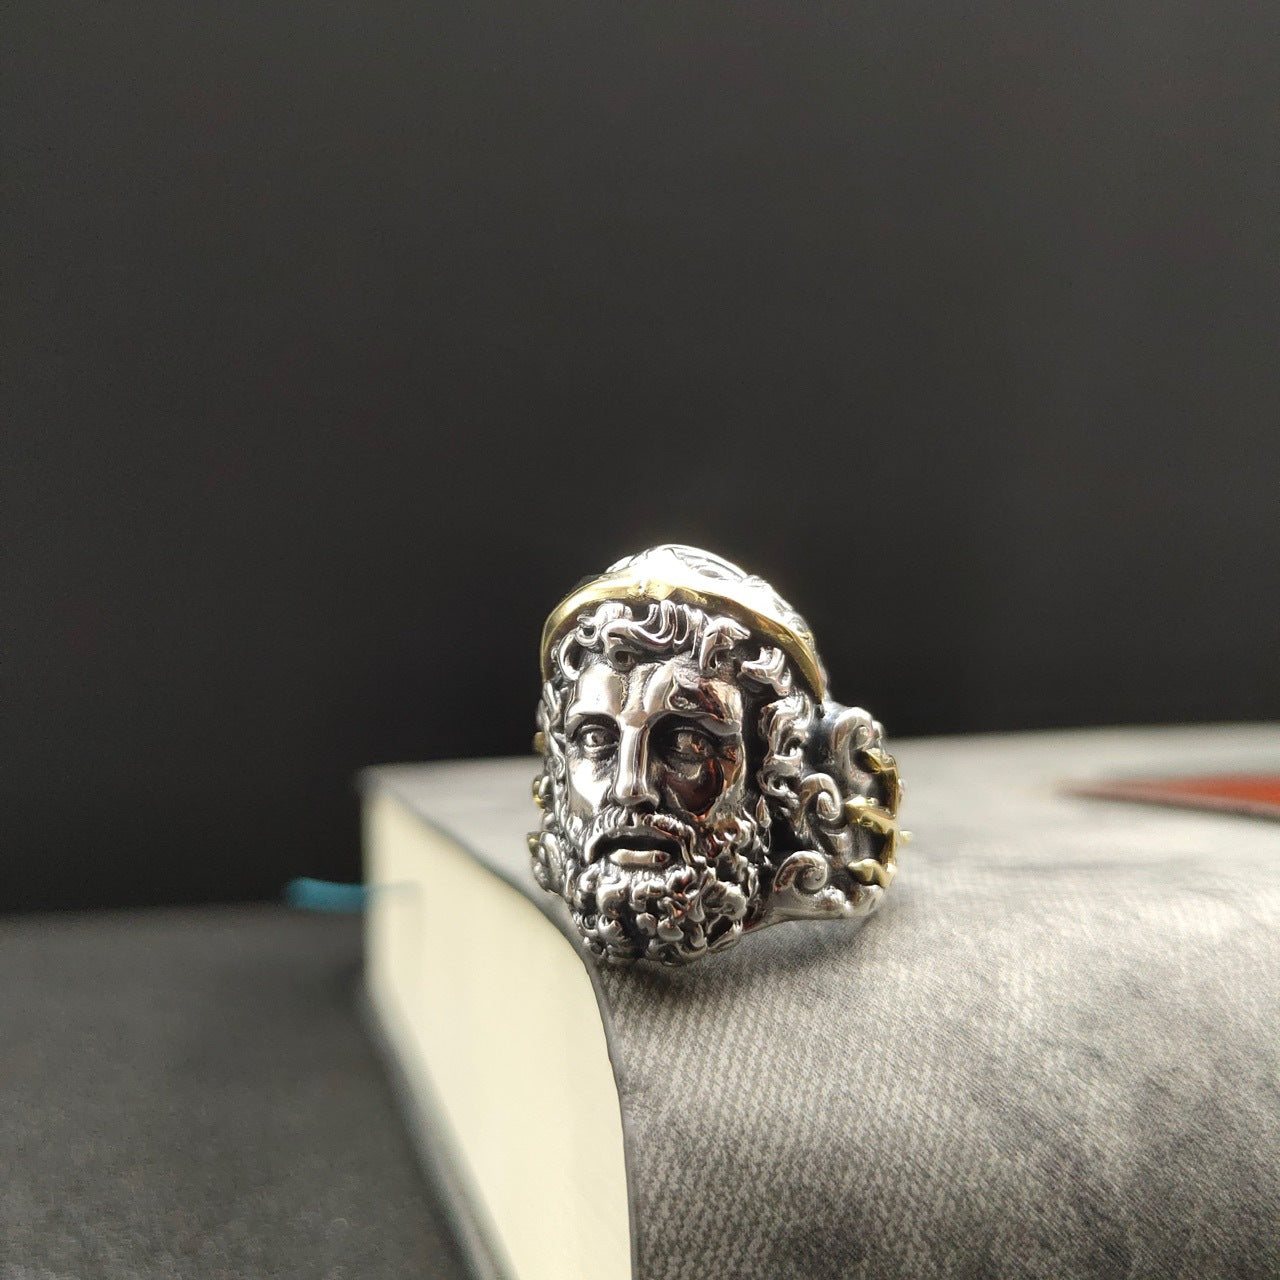 Detailed View of God Zeus Engraving on Silver Ring